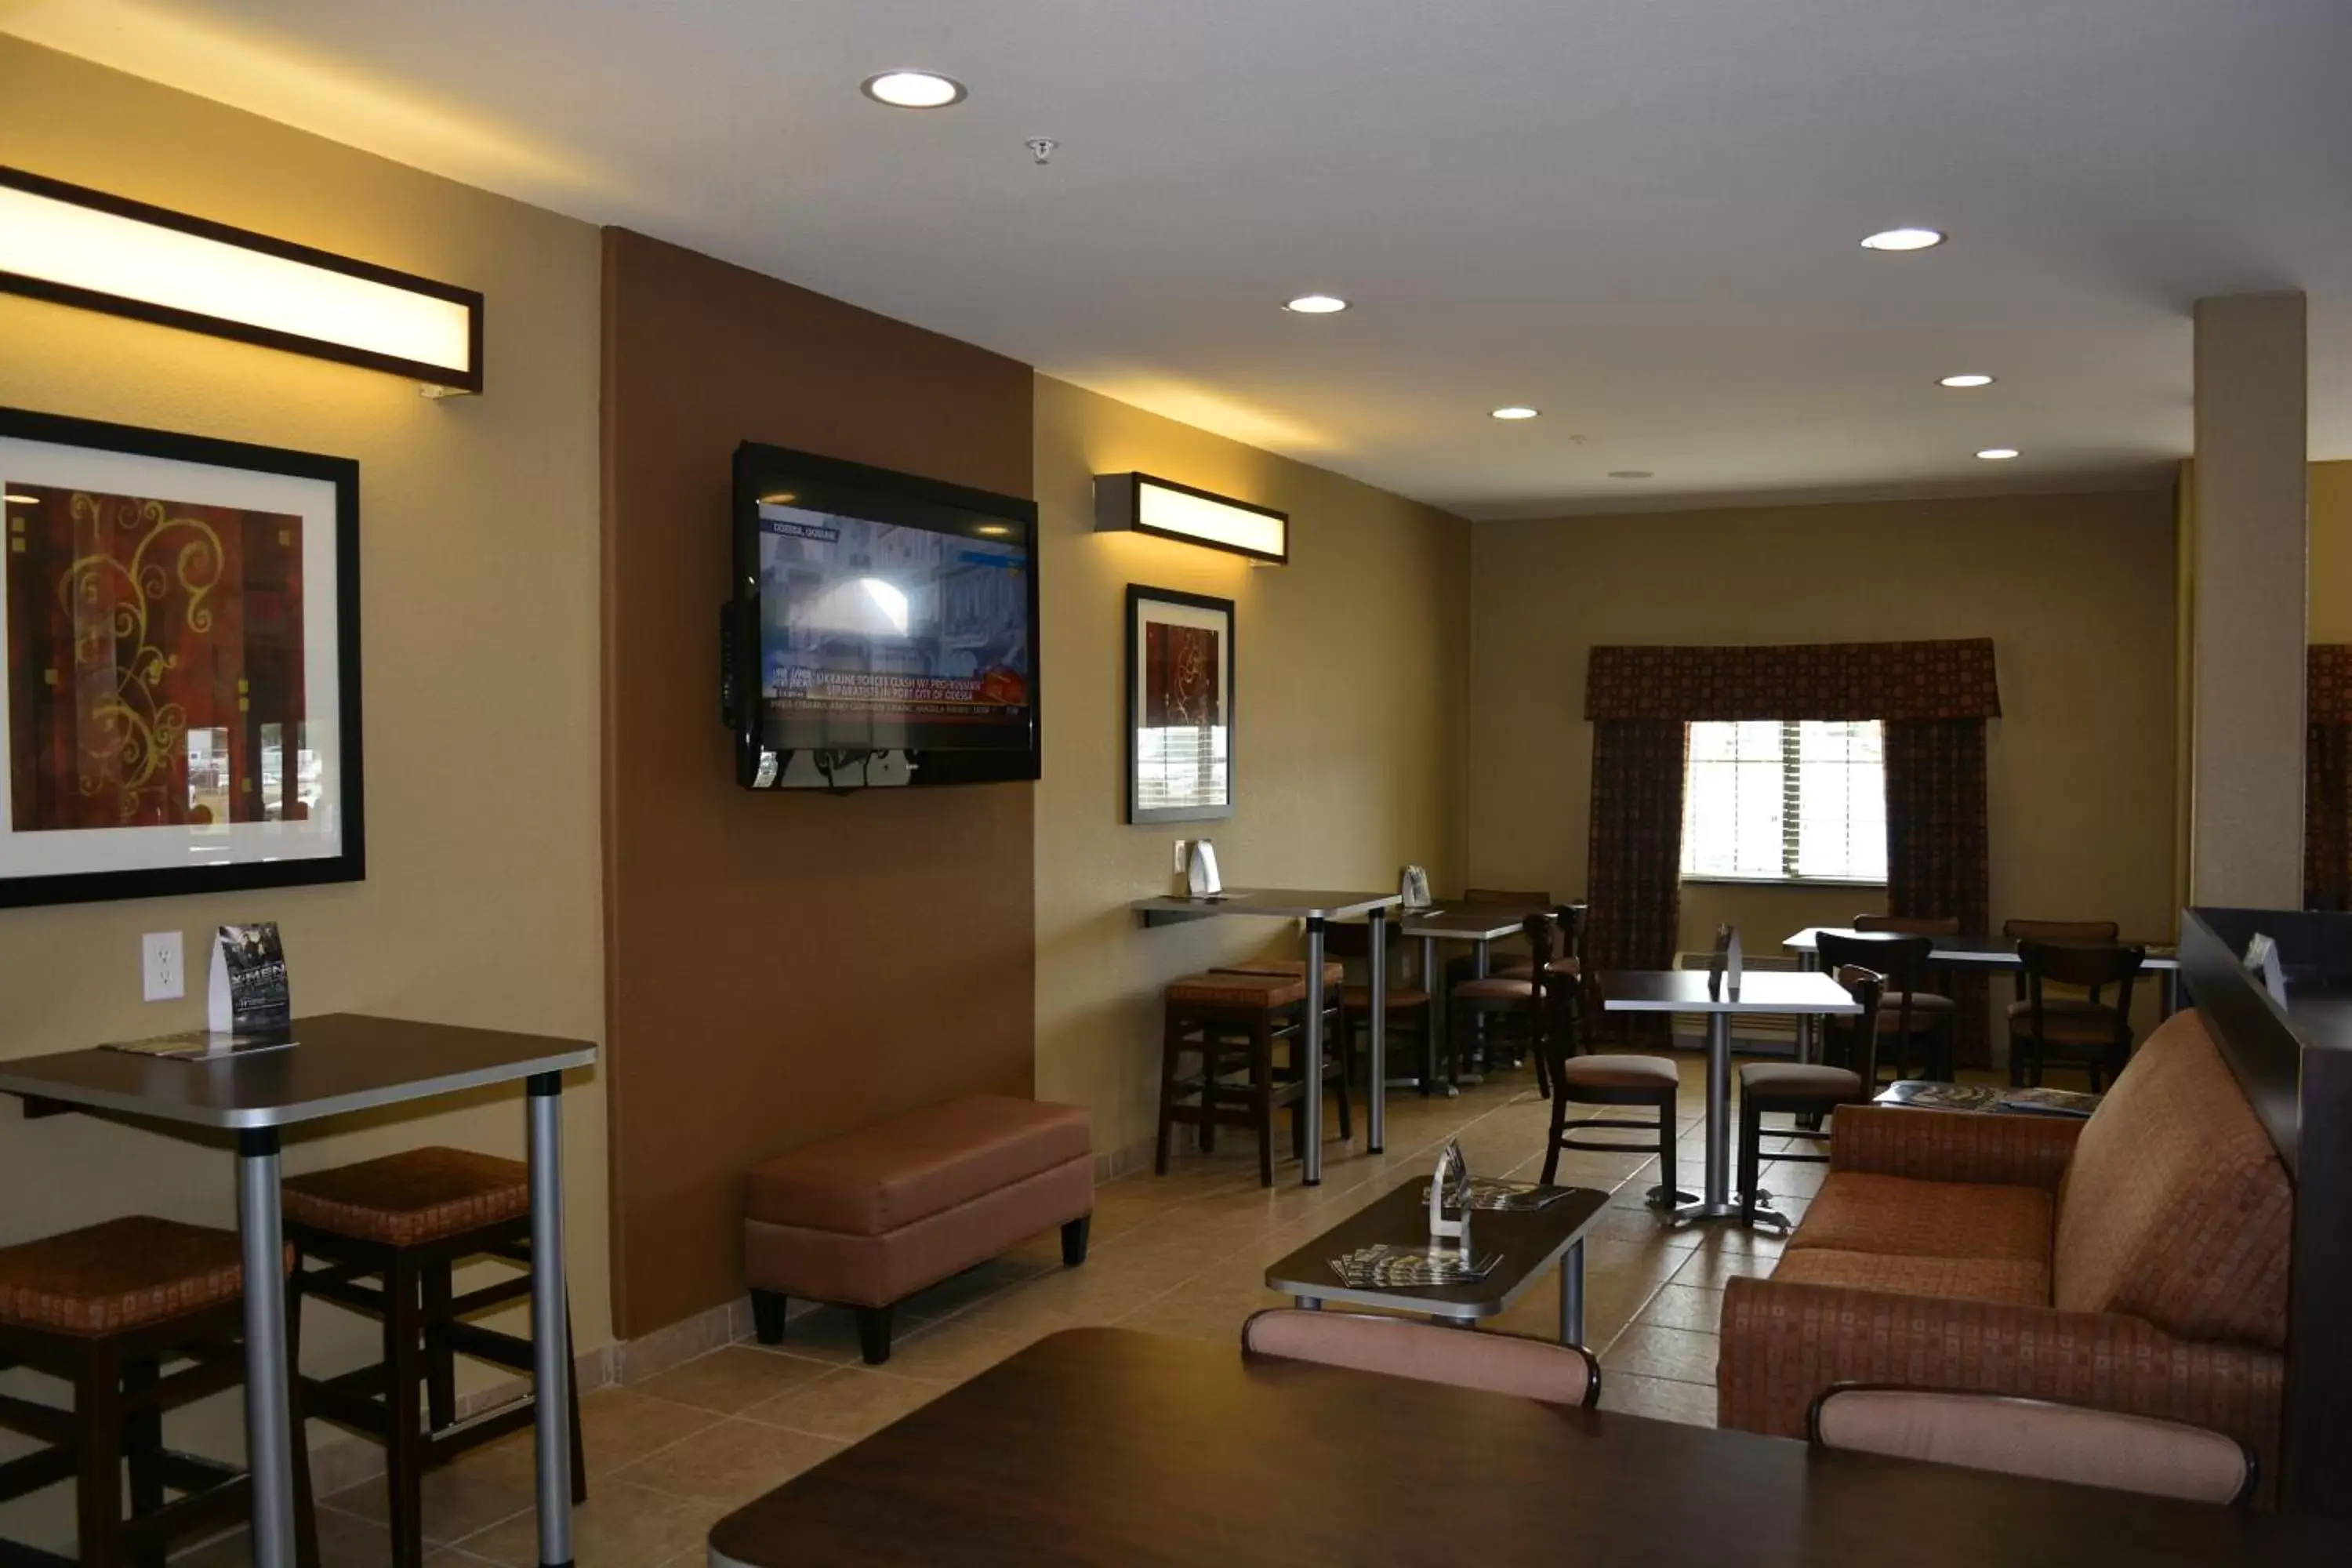 Dining area in Microtel Inn & Suites Gonzales TX